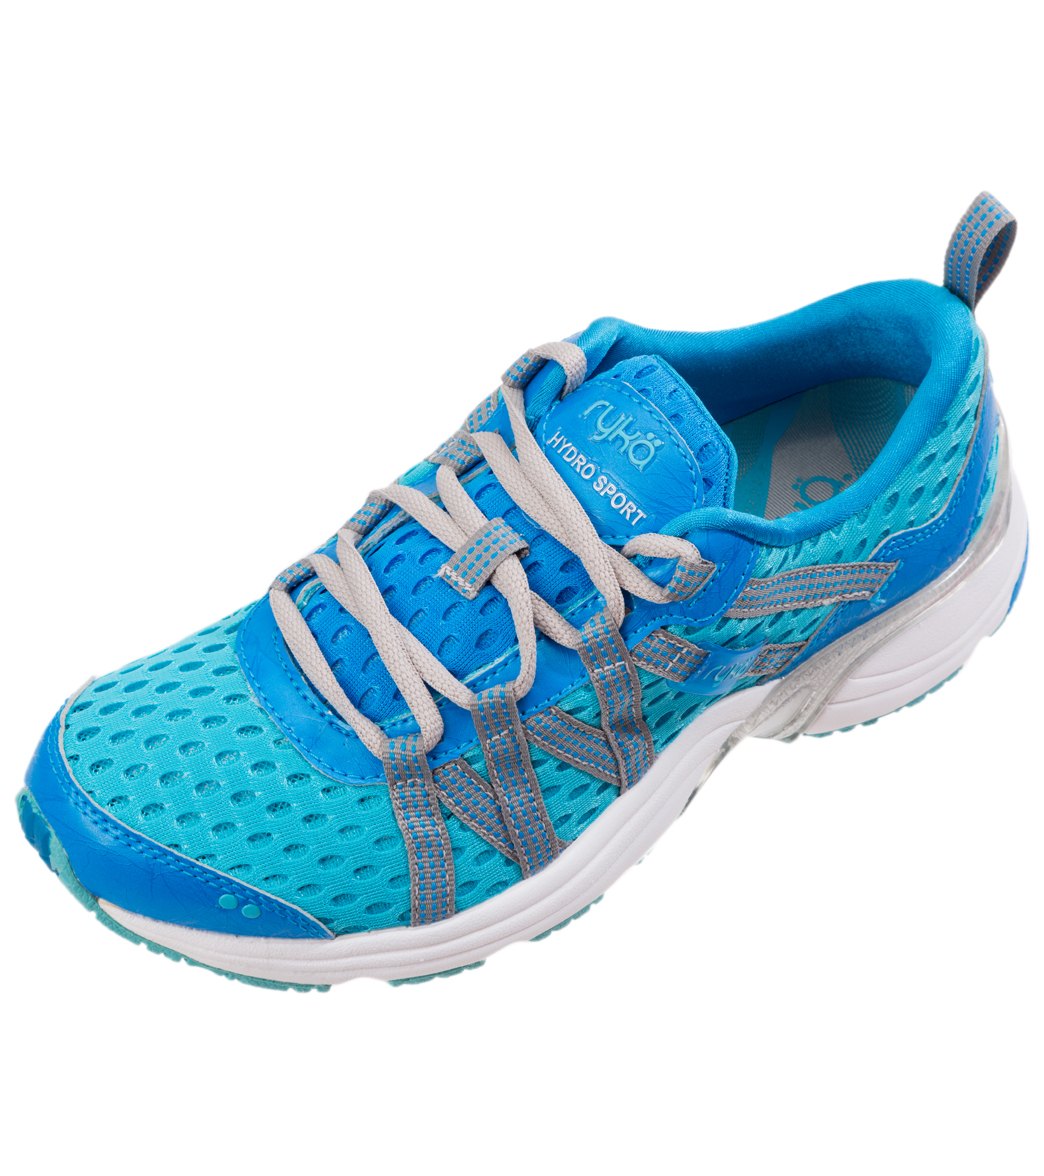 Ryka Women's Hydro Sport Water Shoes at